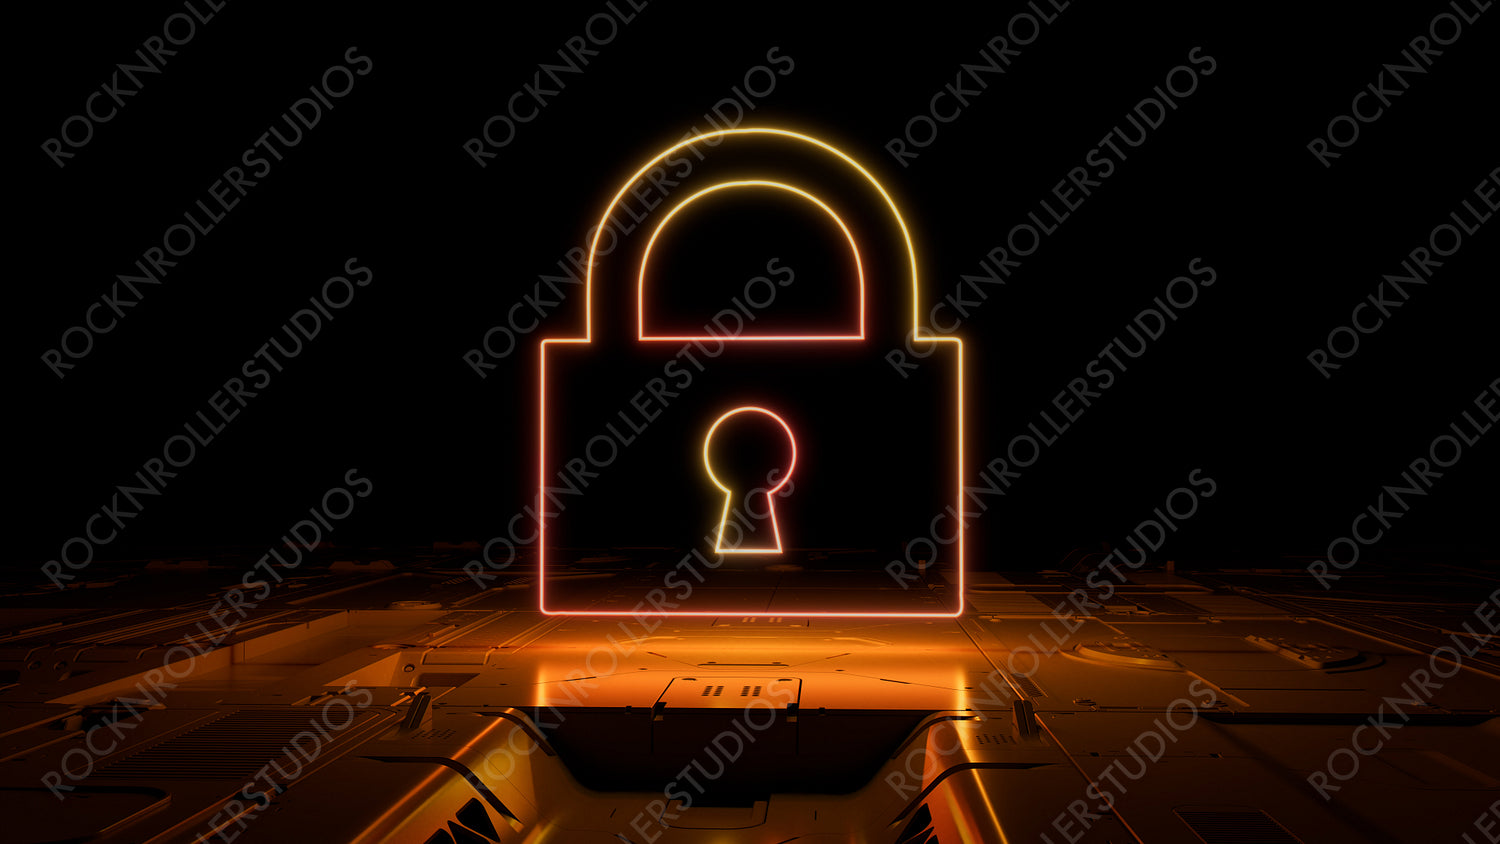 Orange and Yellow Security Technology Concept with lock symbol as a neon light. Vibrant colored icon, on a black background with high tech floor. 3D Render